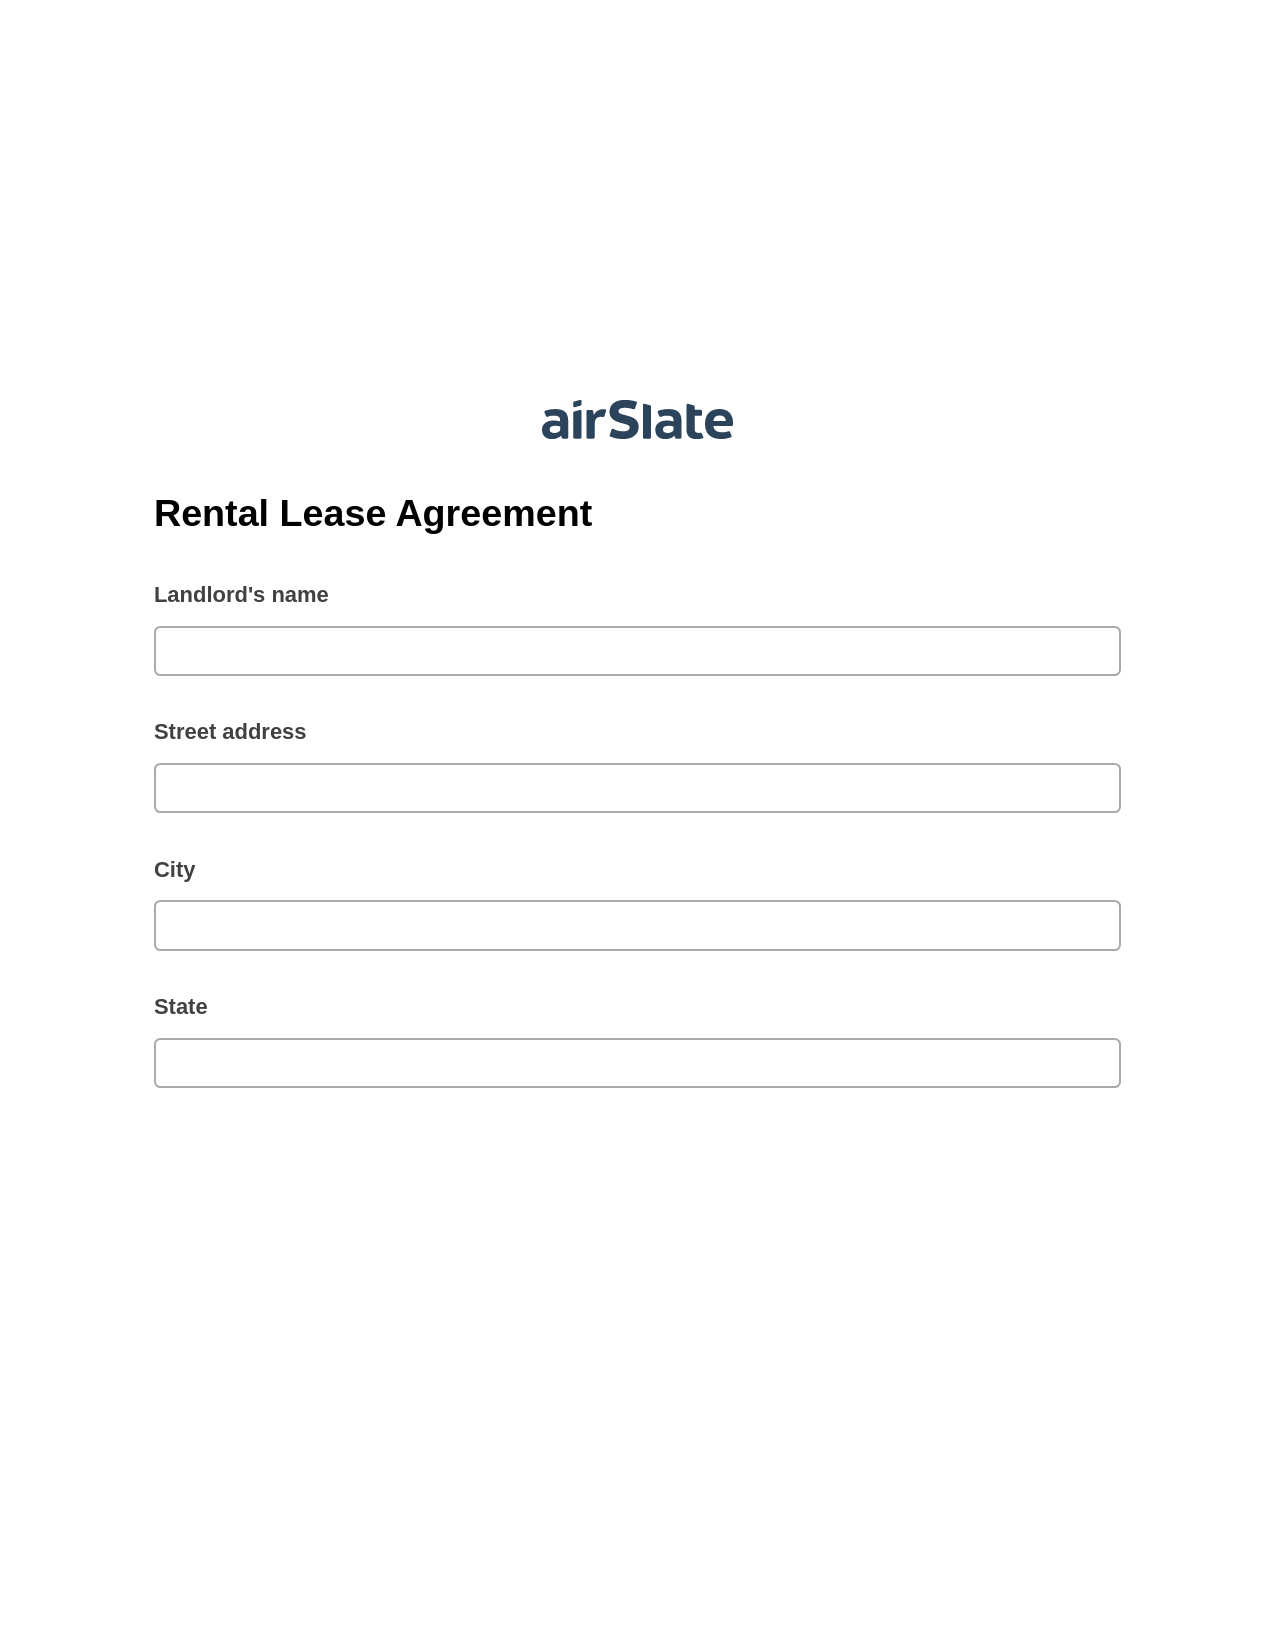 Rental Lease Agreement Pre-fill from Excel Spreadsheet Bot, Create Slate every Google Sheet Update Bot, Export to Excel 365 Bot